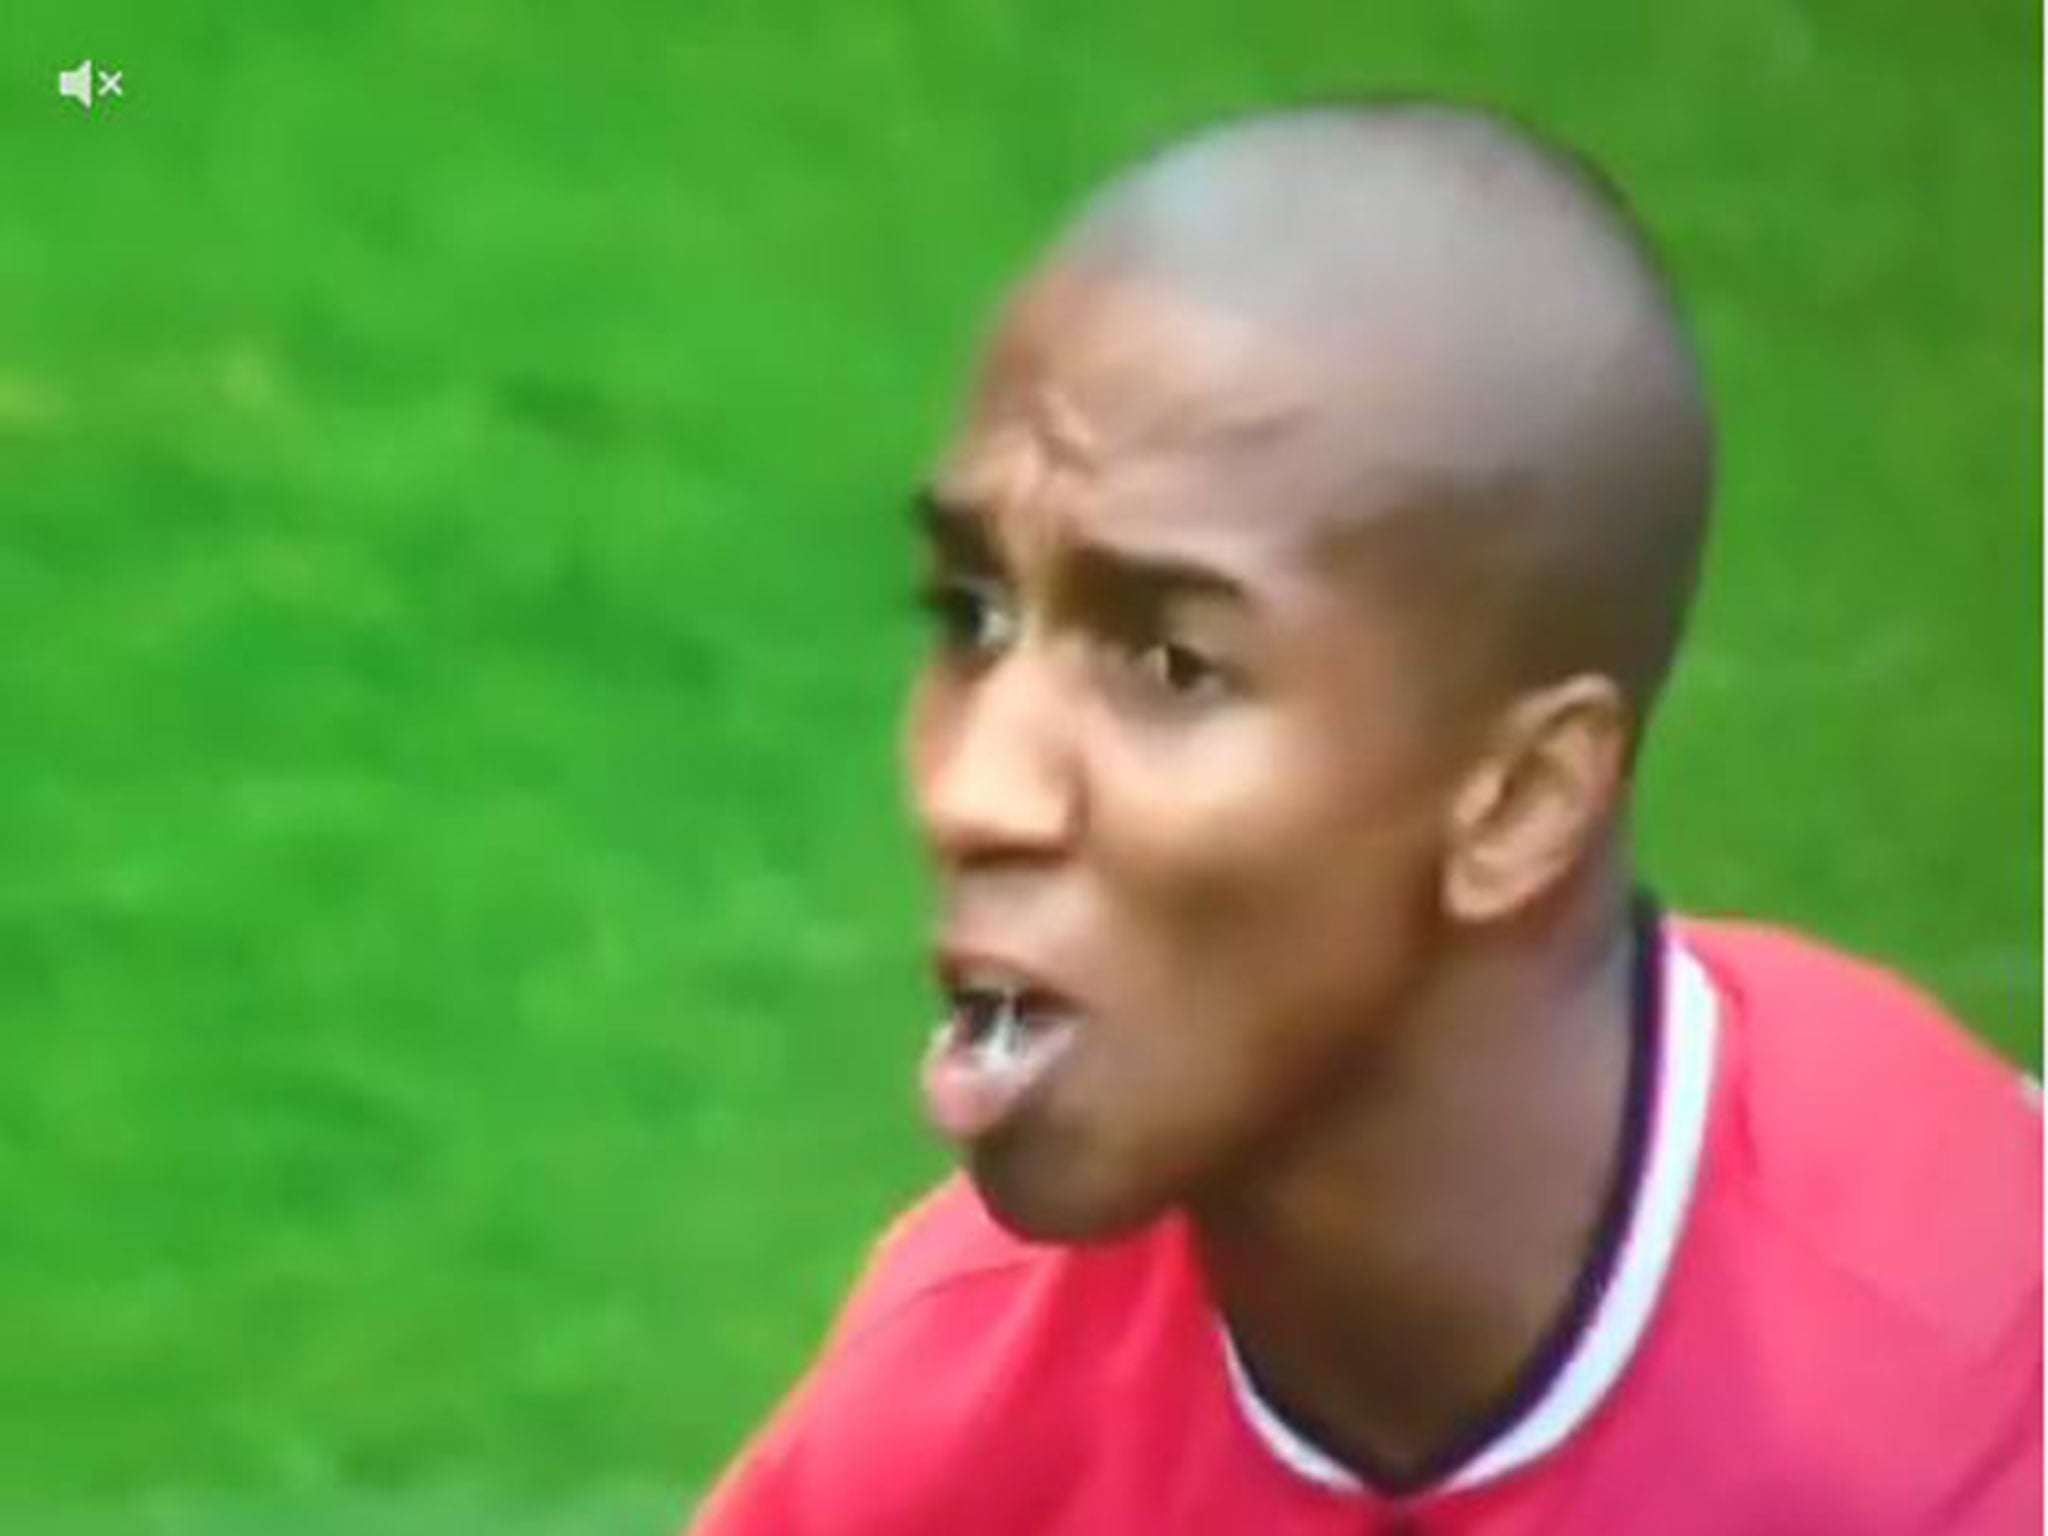 Ashley Young appeared to have a chunk of bird excrement land in his mouth during Manchester United v Swansea